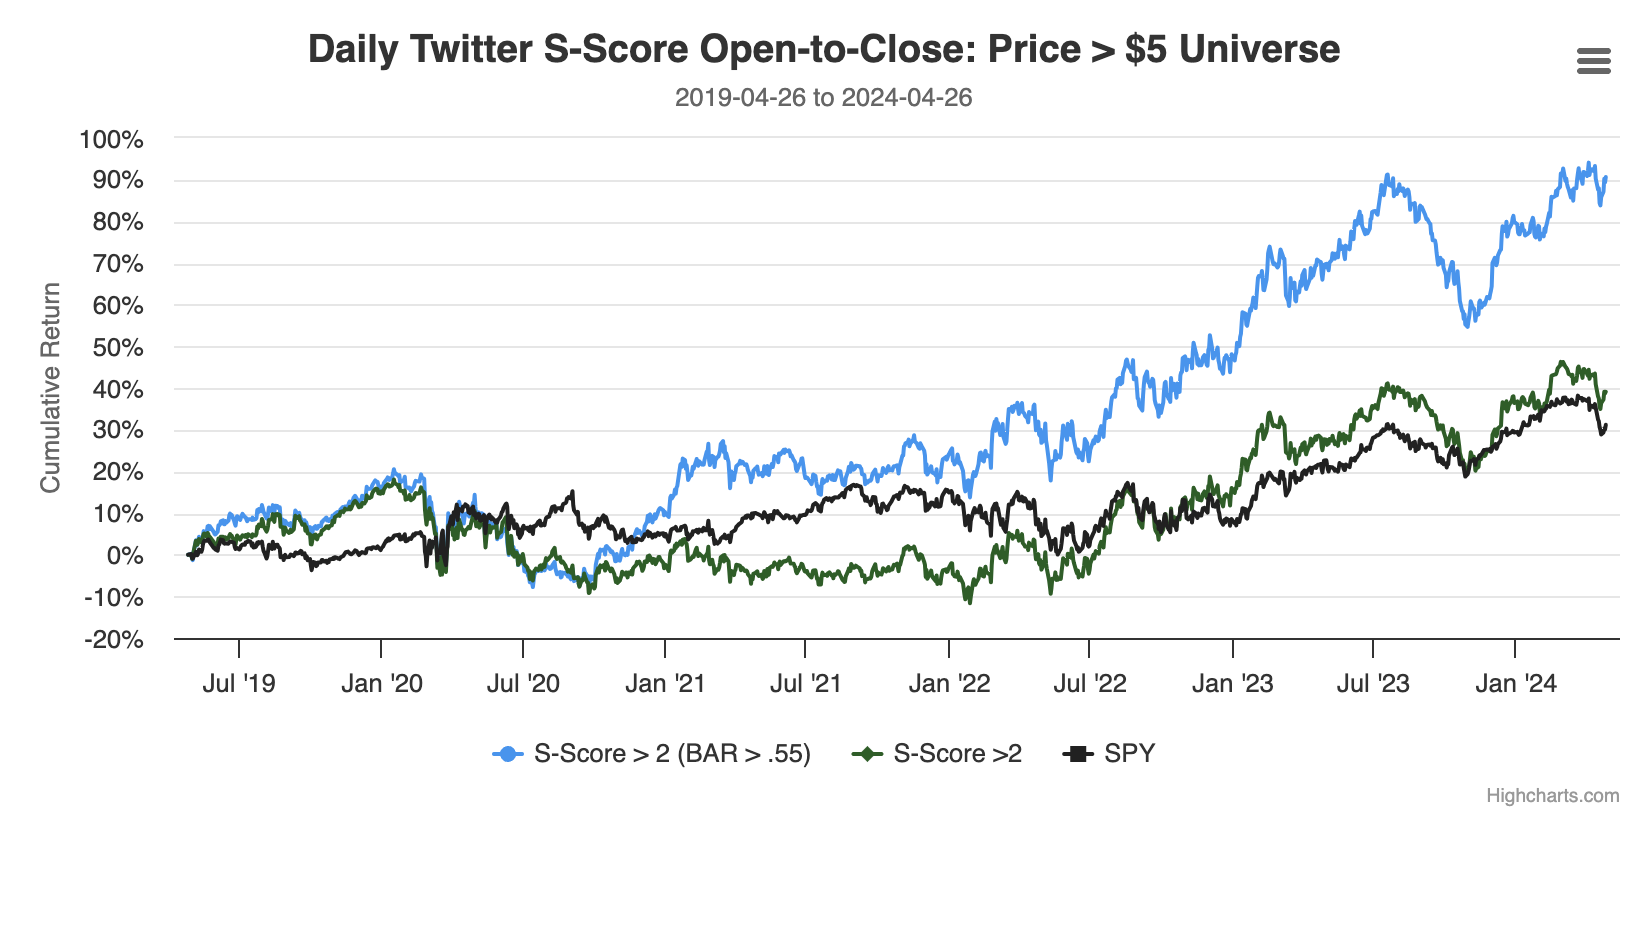 Refining Twitter Trading Signals with Bayesian Probability